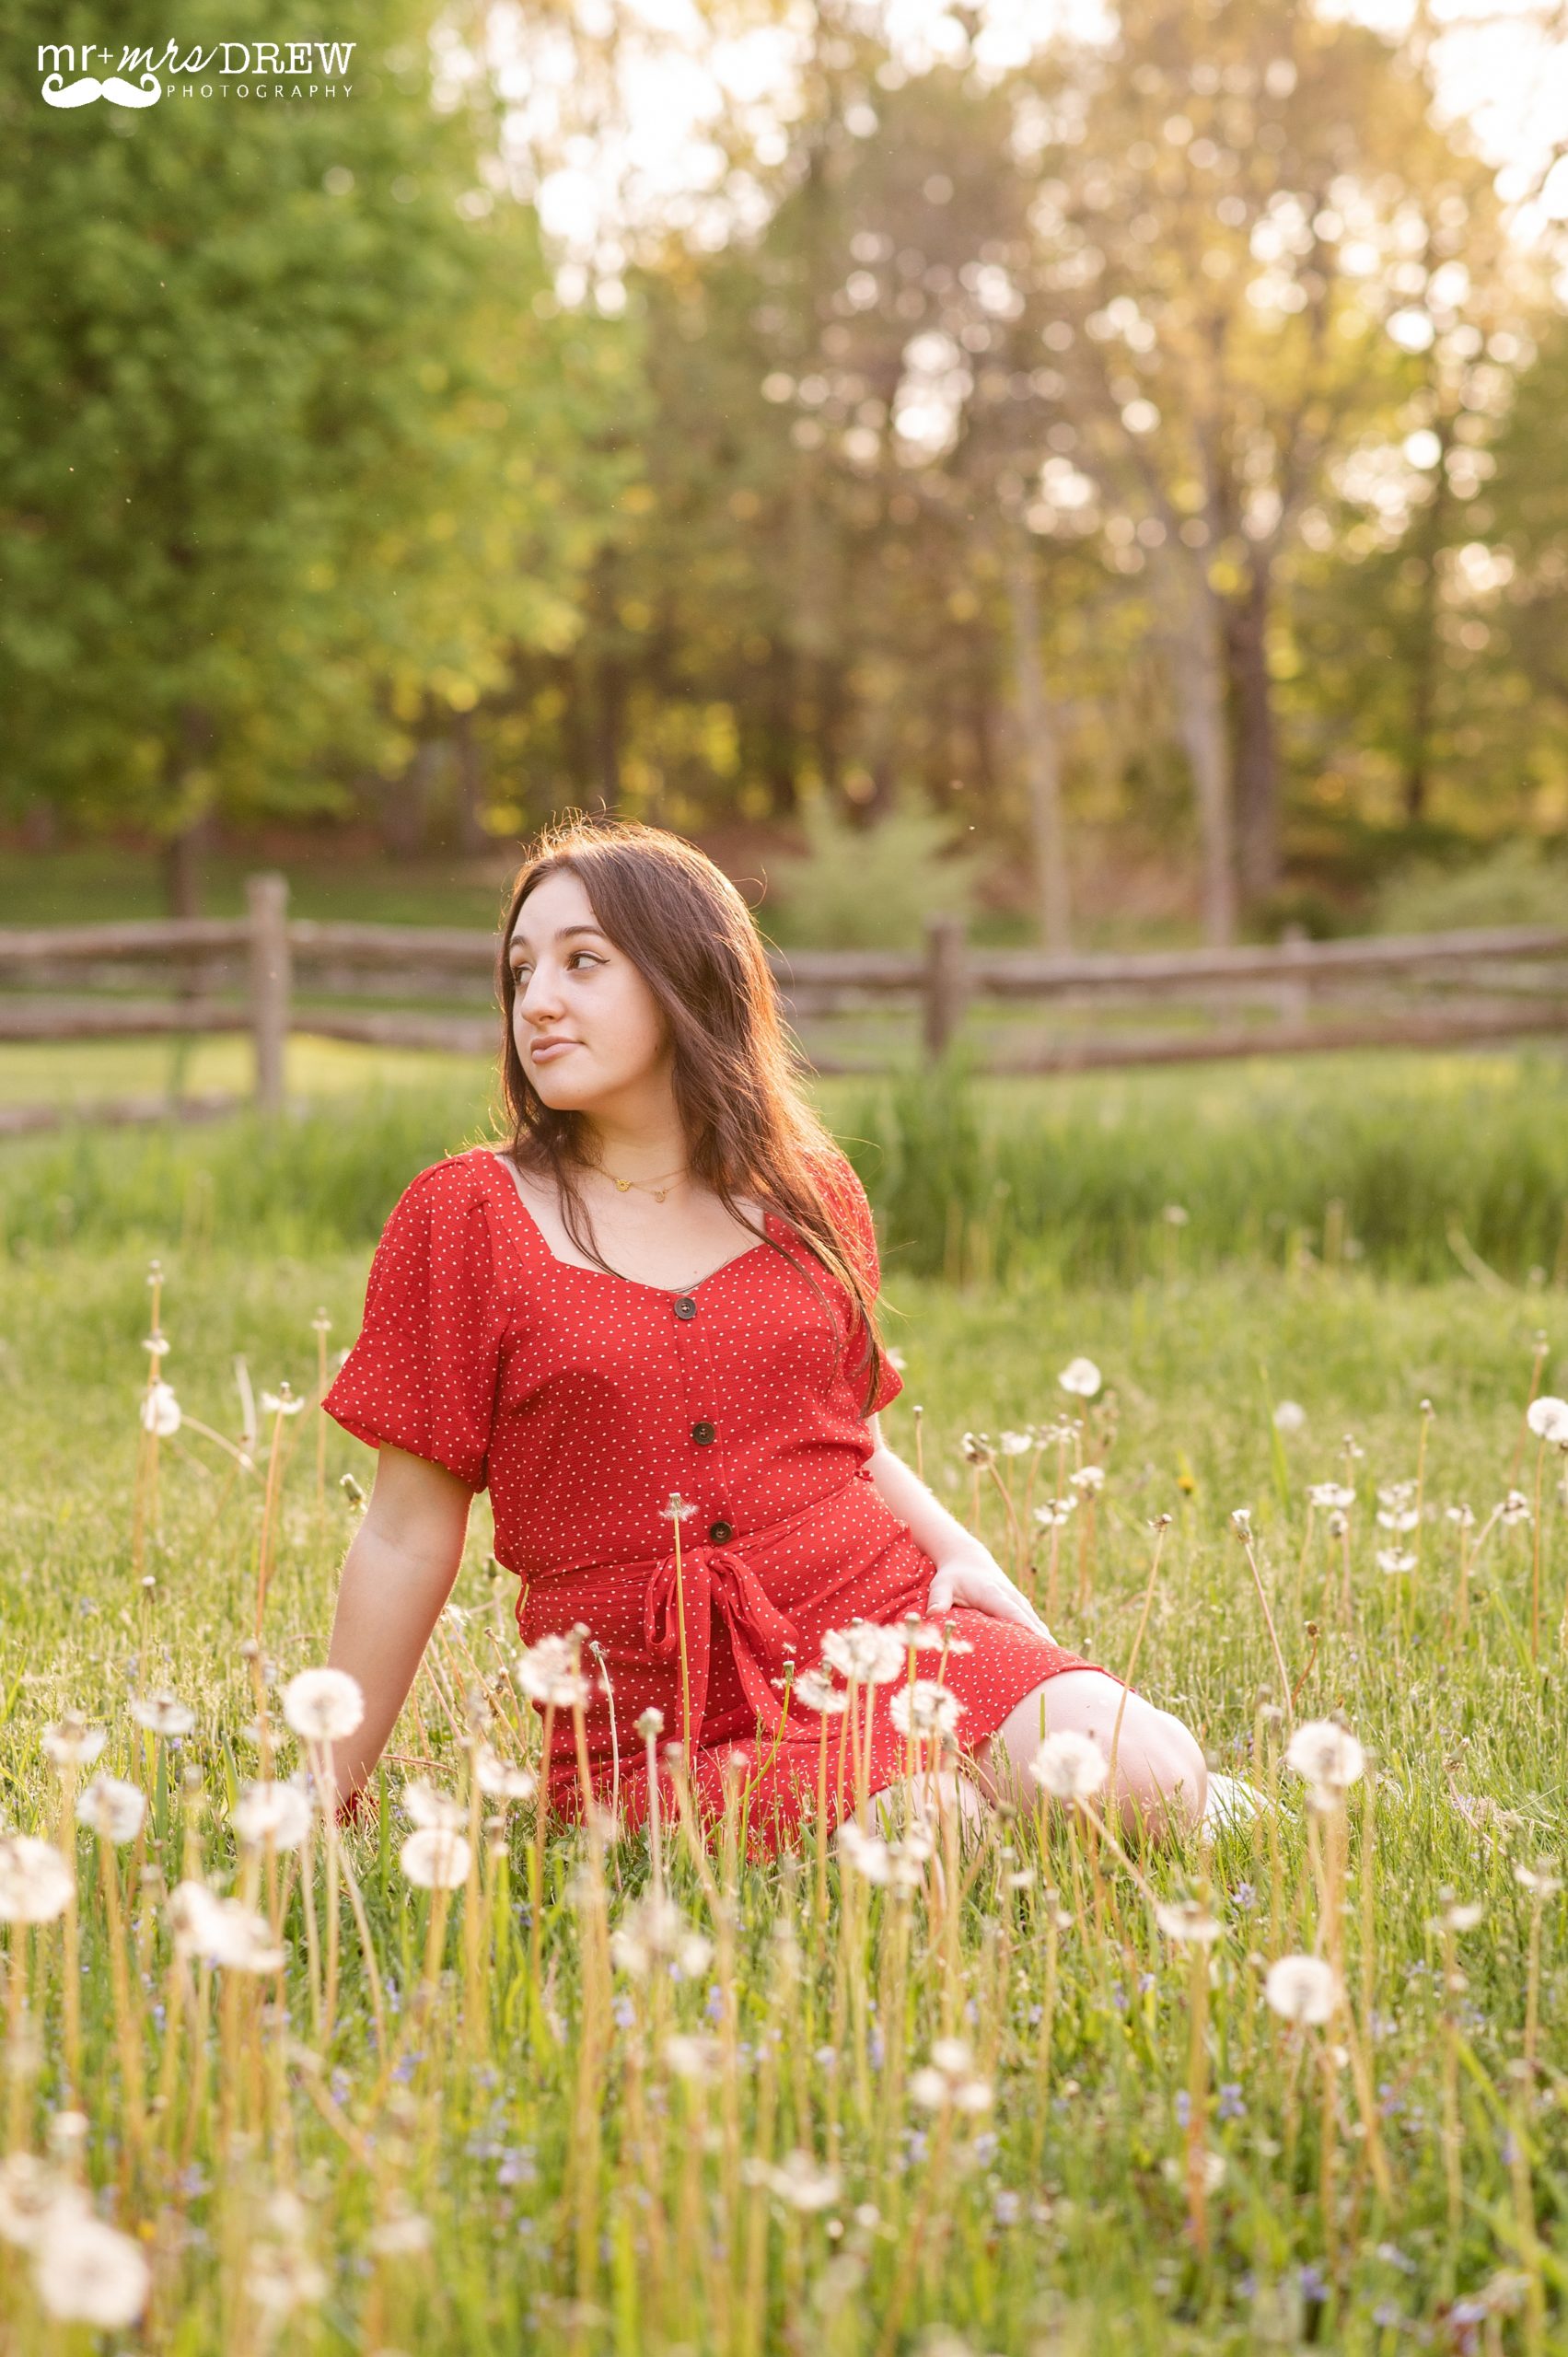 Senior photos in field with white flowers